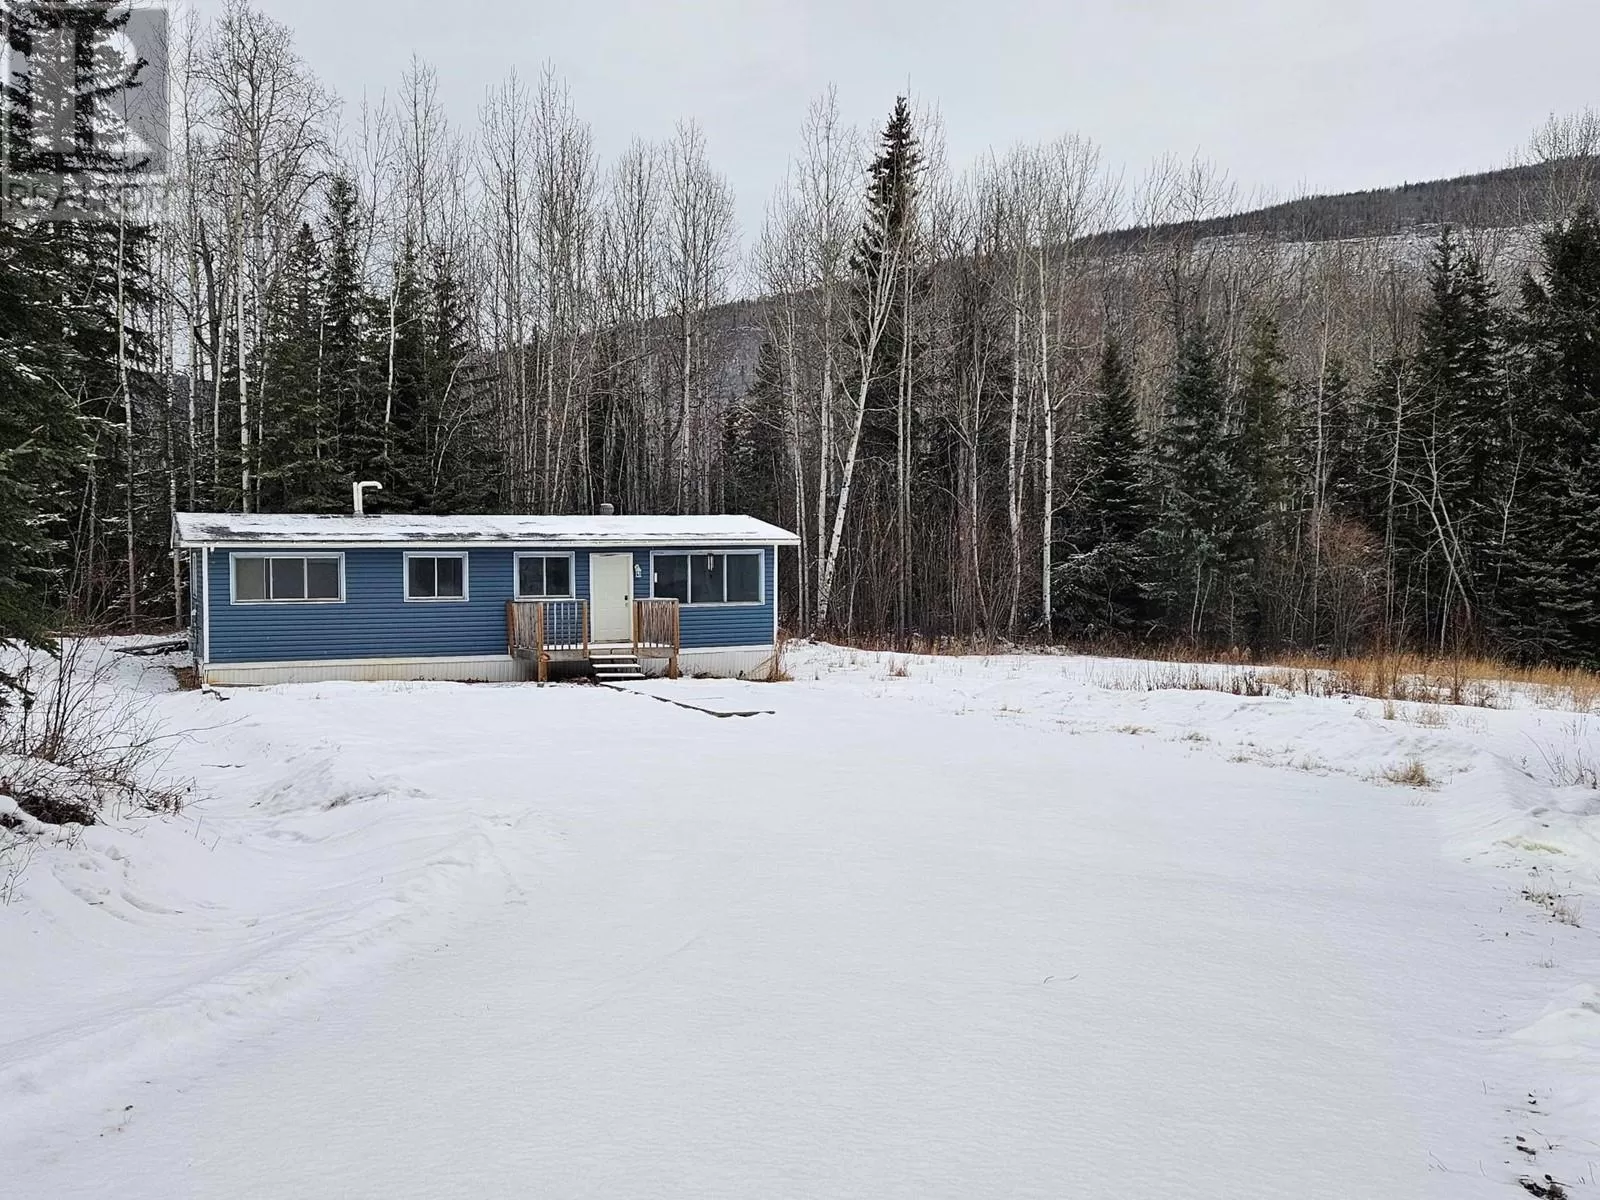 Manufactured Home for rent: 6366 Wildmare Road, Chetwynd, British Columbia V0C 1J0